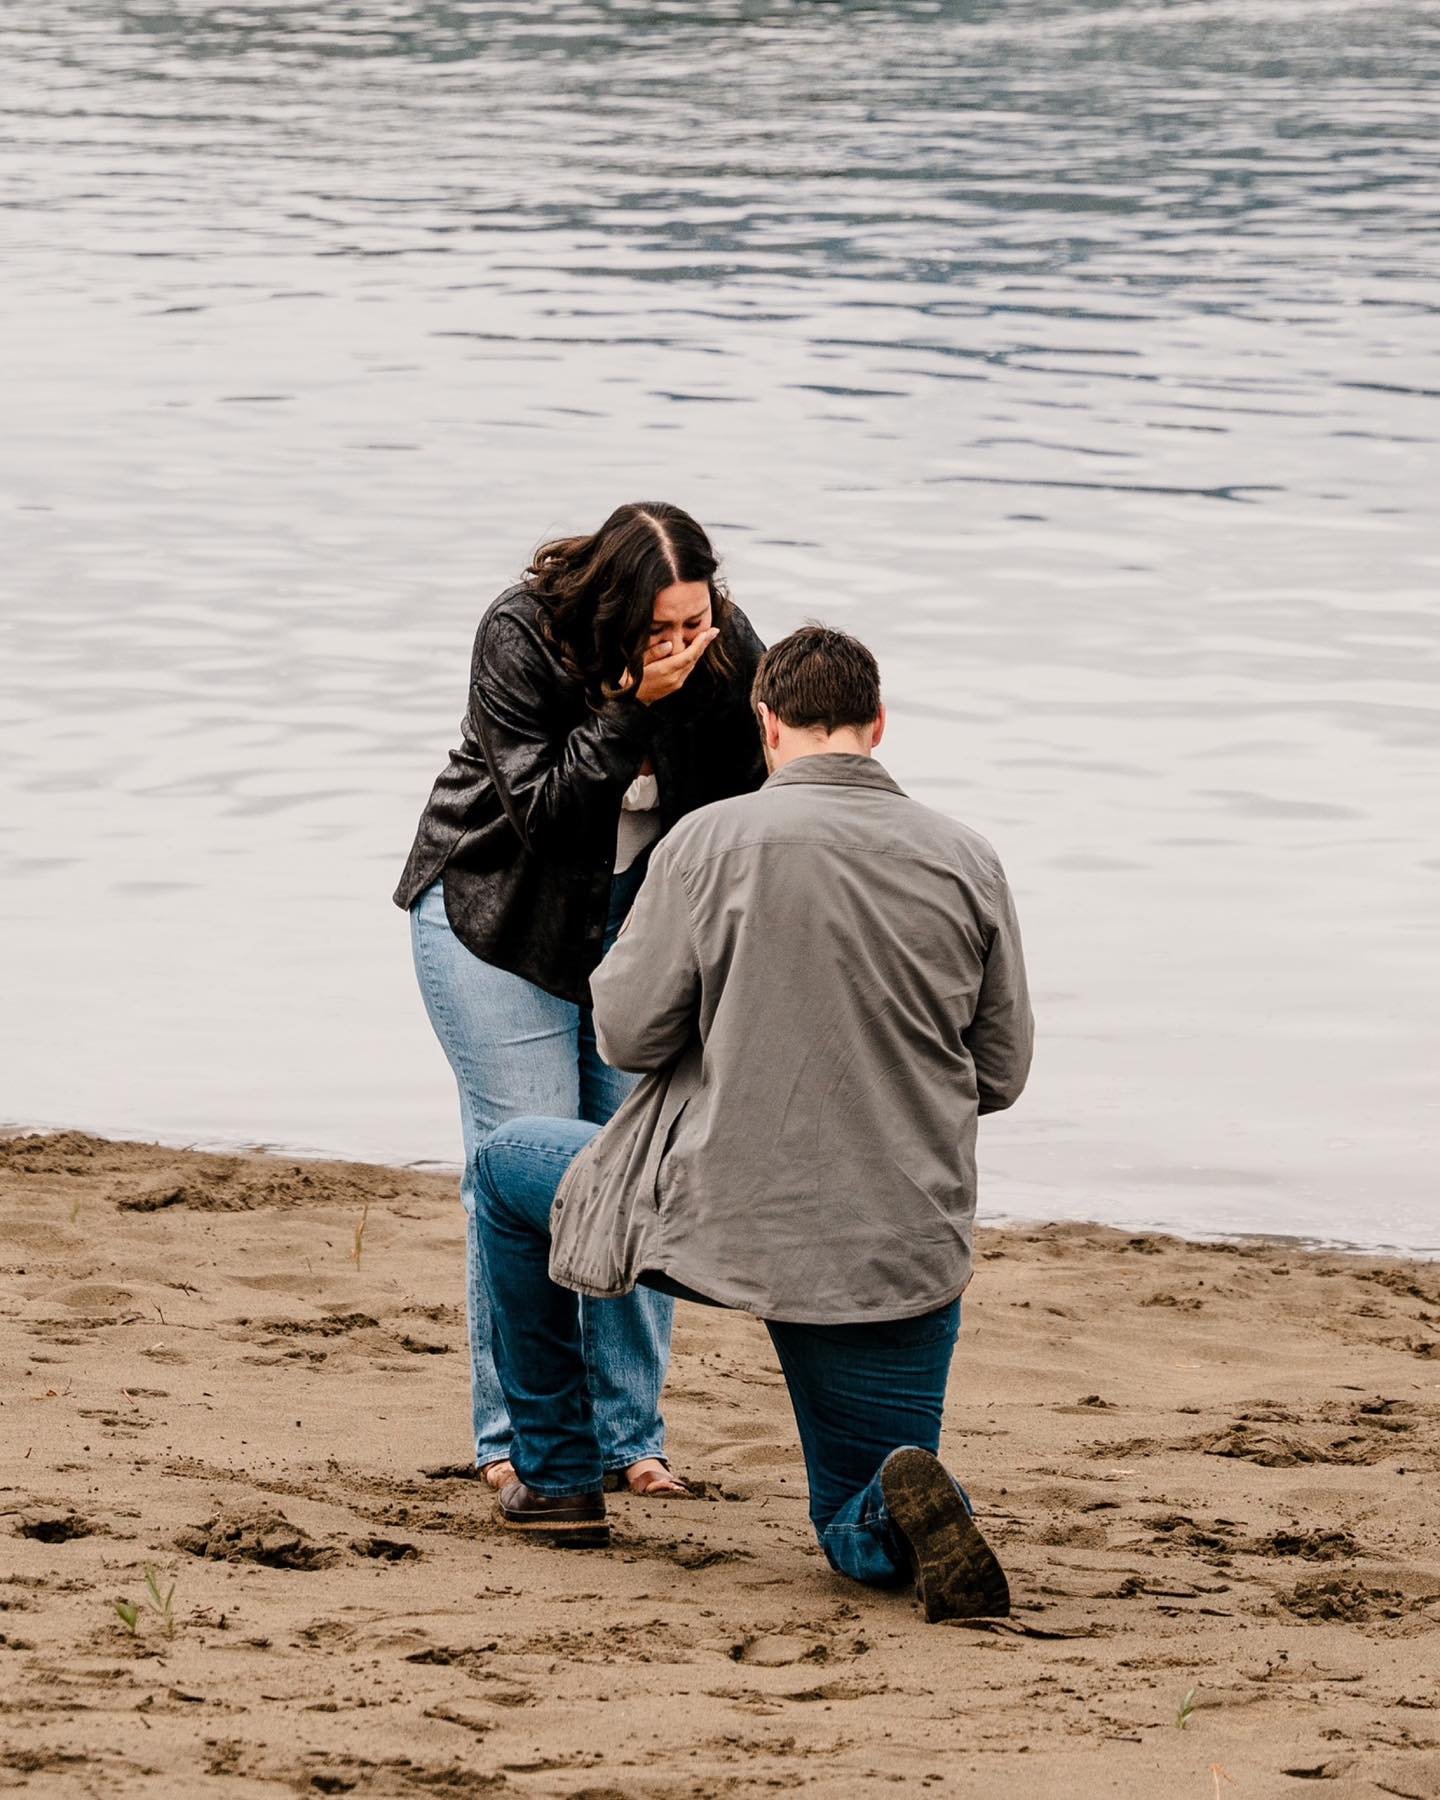 This beach proposal could not have been more perfect🥹 It had been raining all day, the couple was running behind, but then right as they approached the beach, the clouds parted and the rain stopped! Thank you, Jesus!🤩 Moments like this are such an 